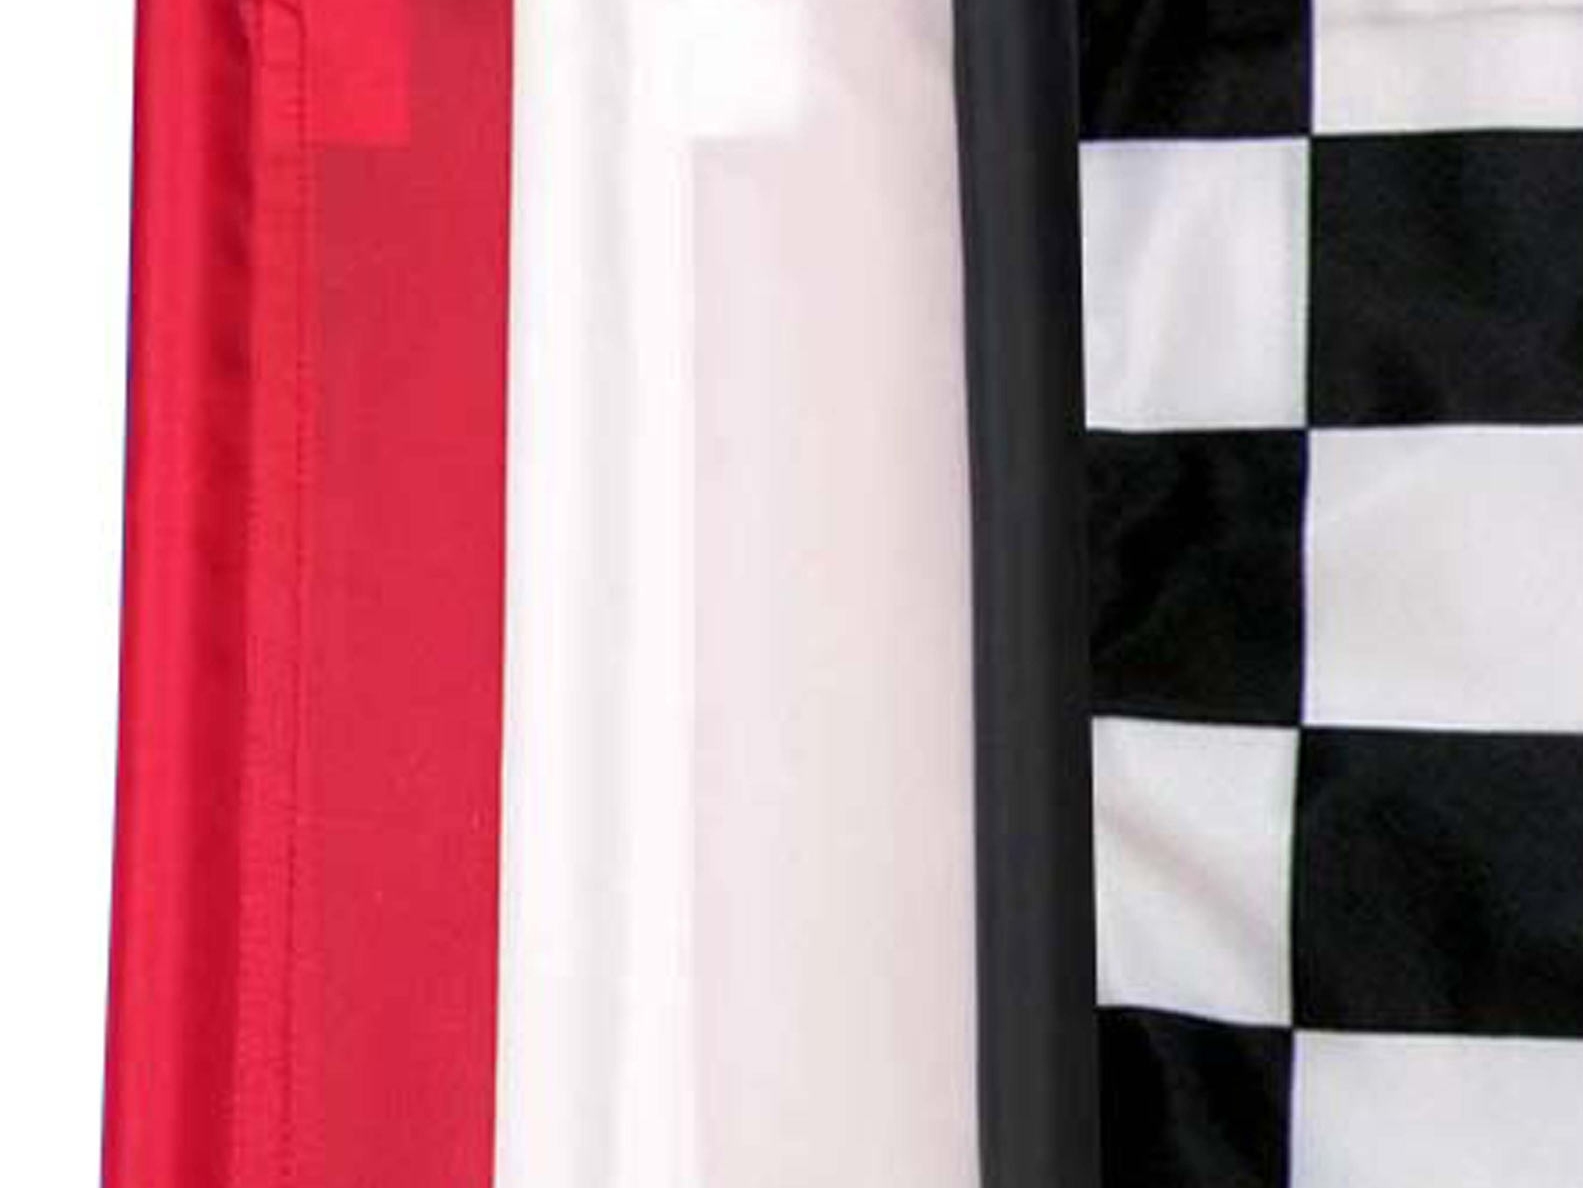 Golf Putting Greens Flags 3 Colors: red, white, checkered. Synthetic turf installation